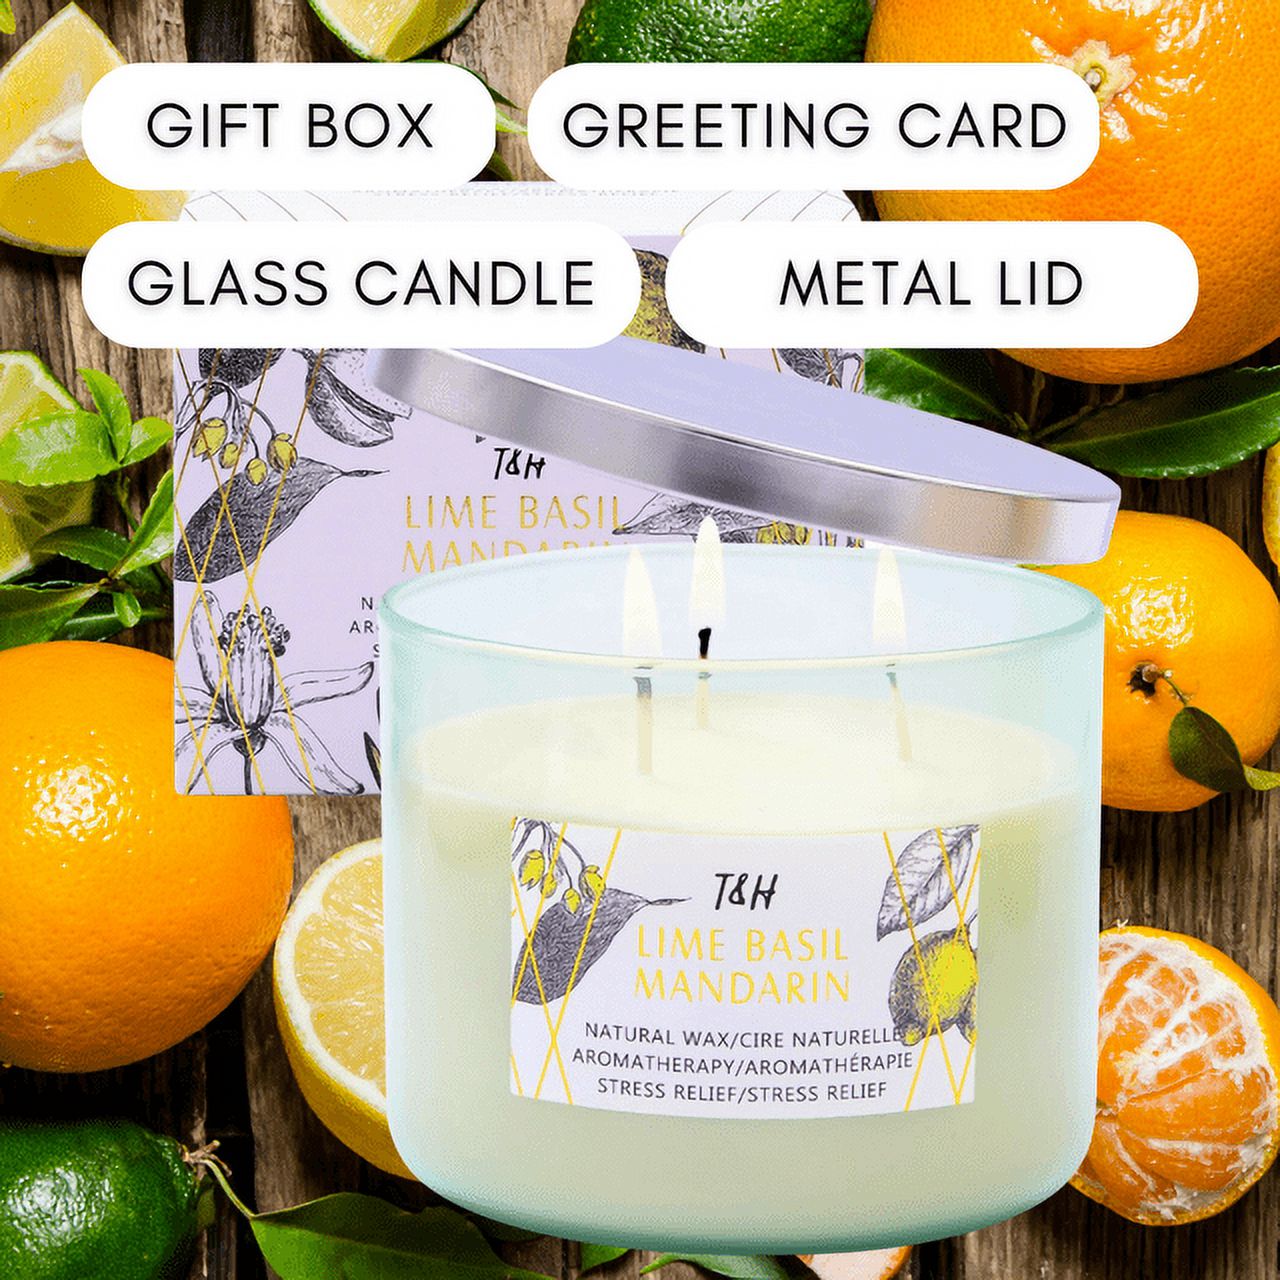 Lime Basil Mandarin 3-Wick Candle | Natural Soy Wax Candle for Home, 15.8 Oz Large Aromatherapy Candle for Relaxation, Scented Candle for Women and Men, Luxury Candle Gift for Him and Her - image 5 of 6